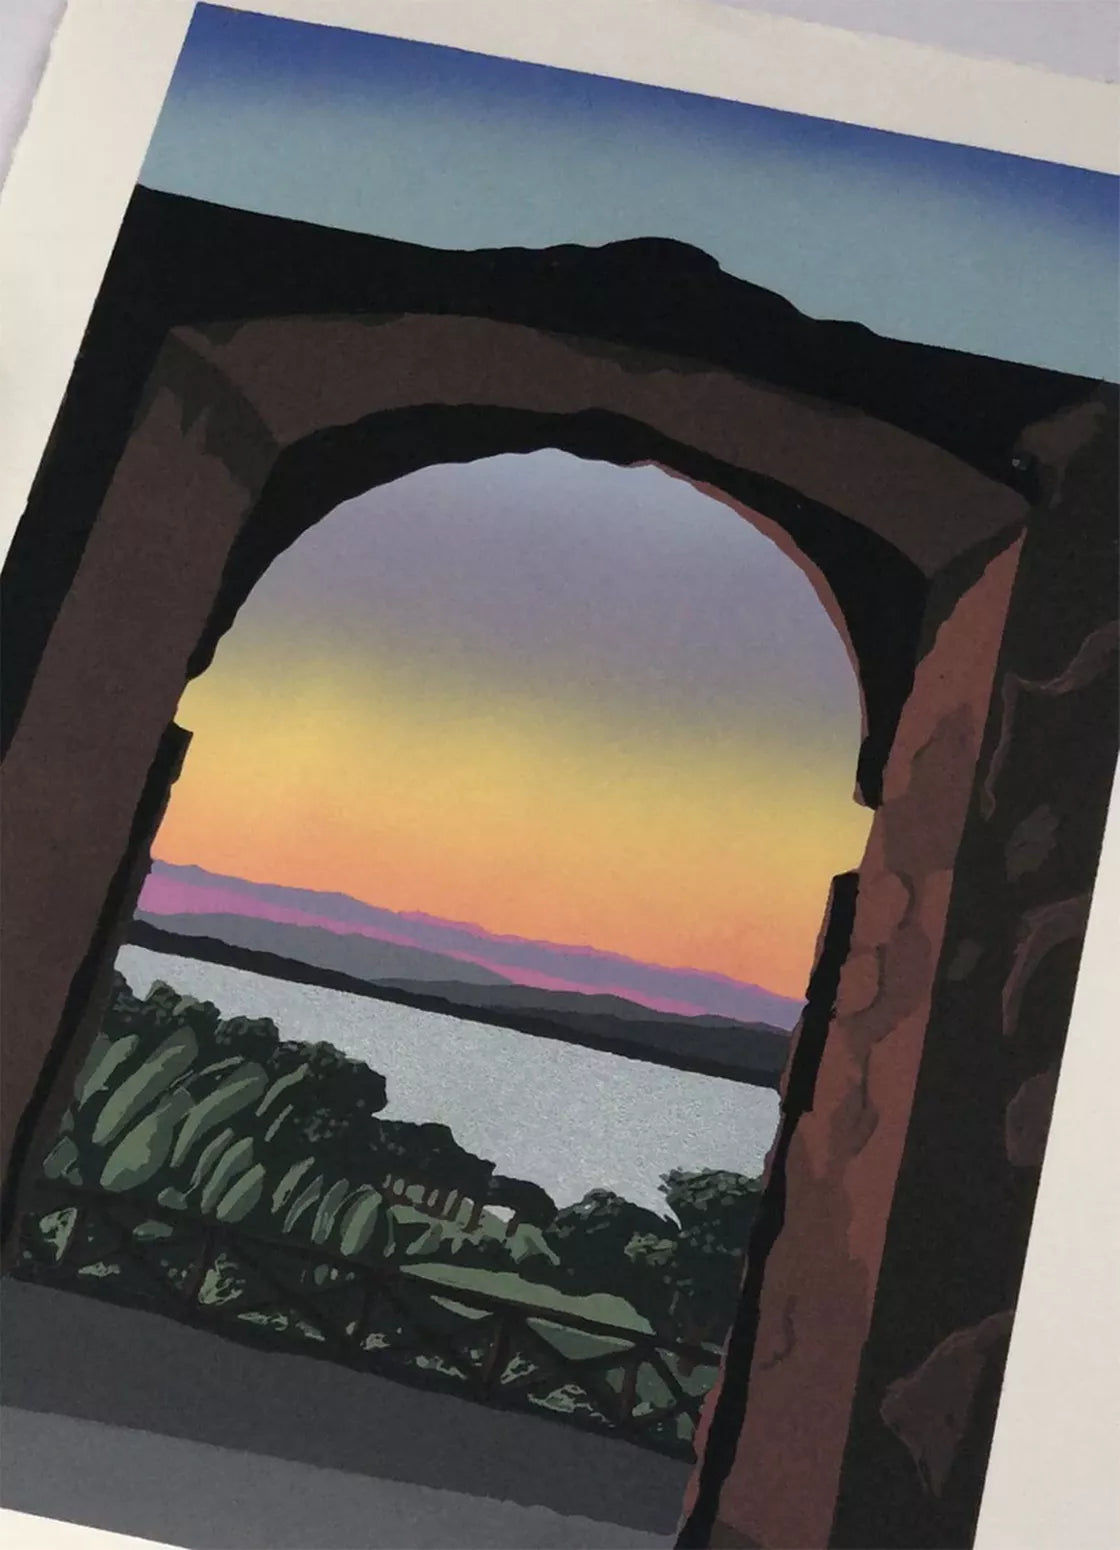 Sunset with arch and lake, Italy (2020) Linocut print from a limited edition of 8